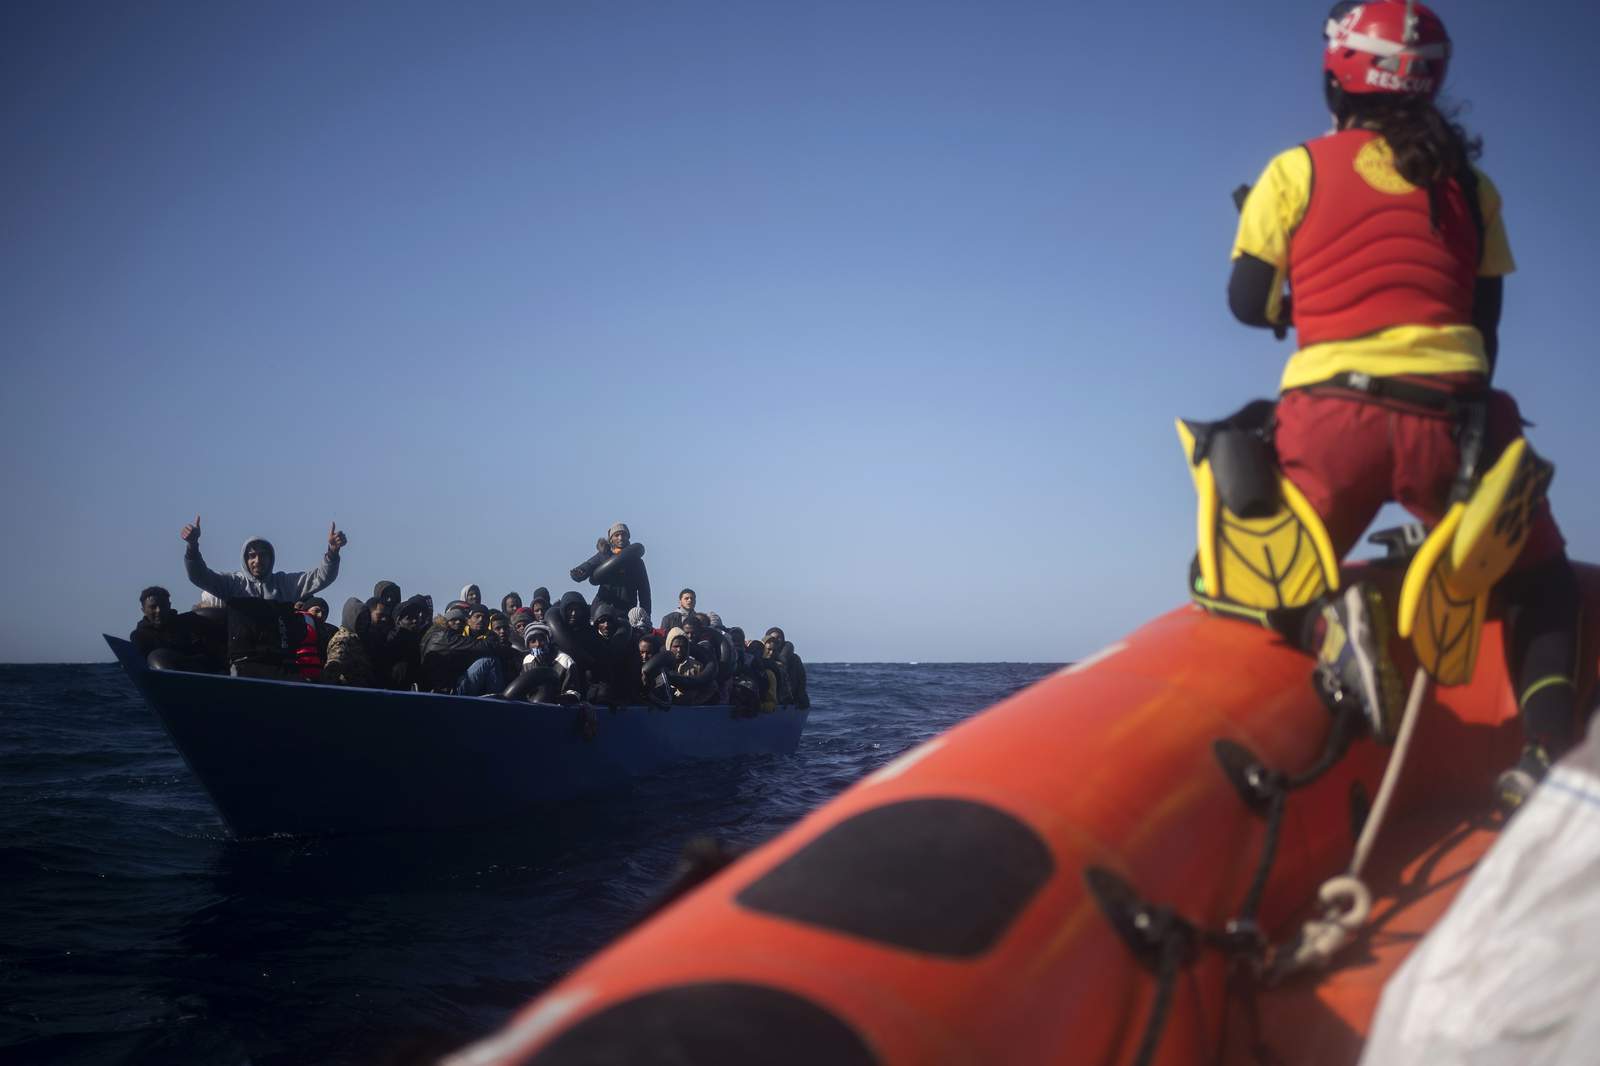 Spanish-flagged boat rescues 265 migrants in Mediterranean